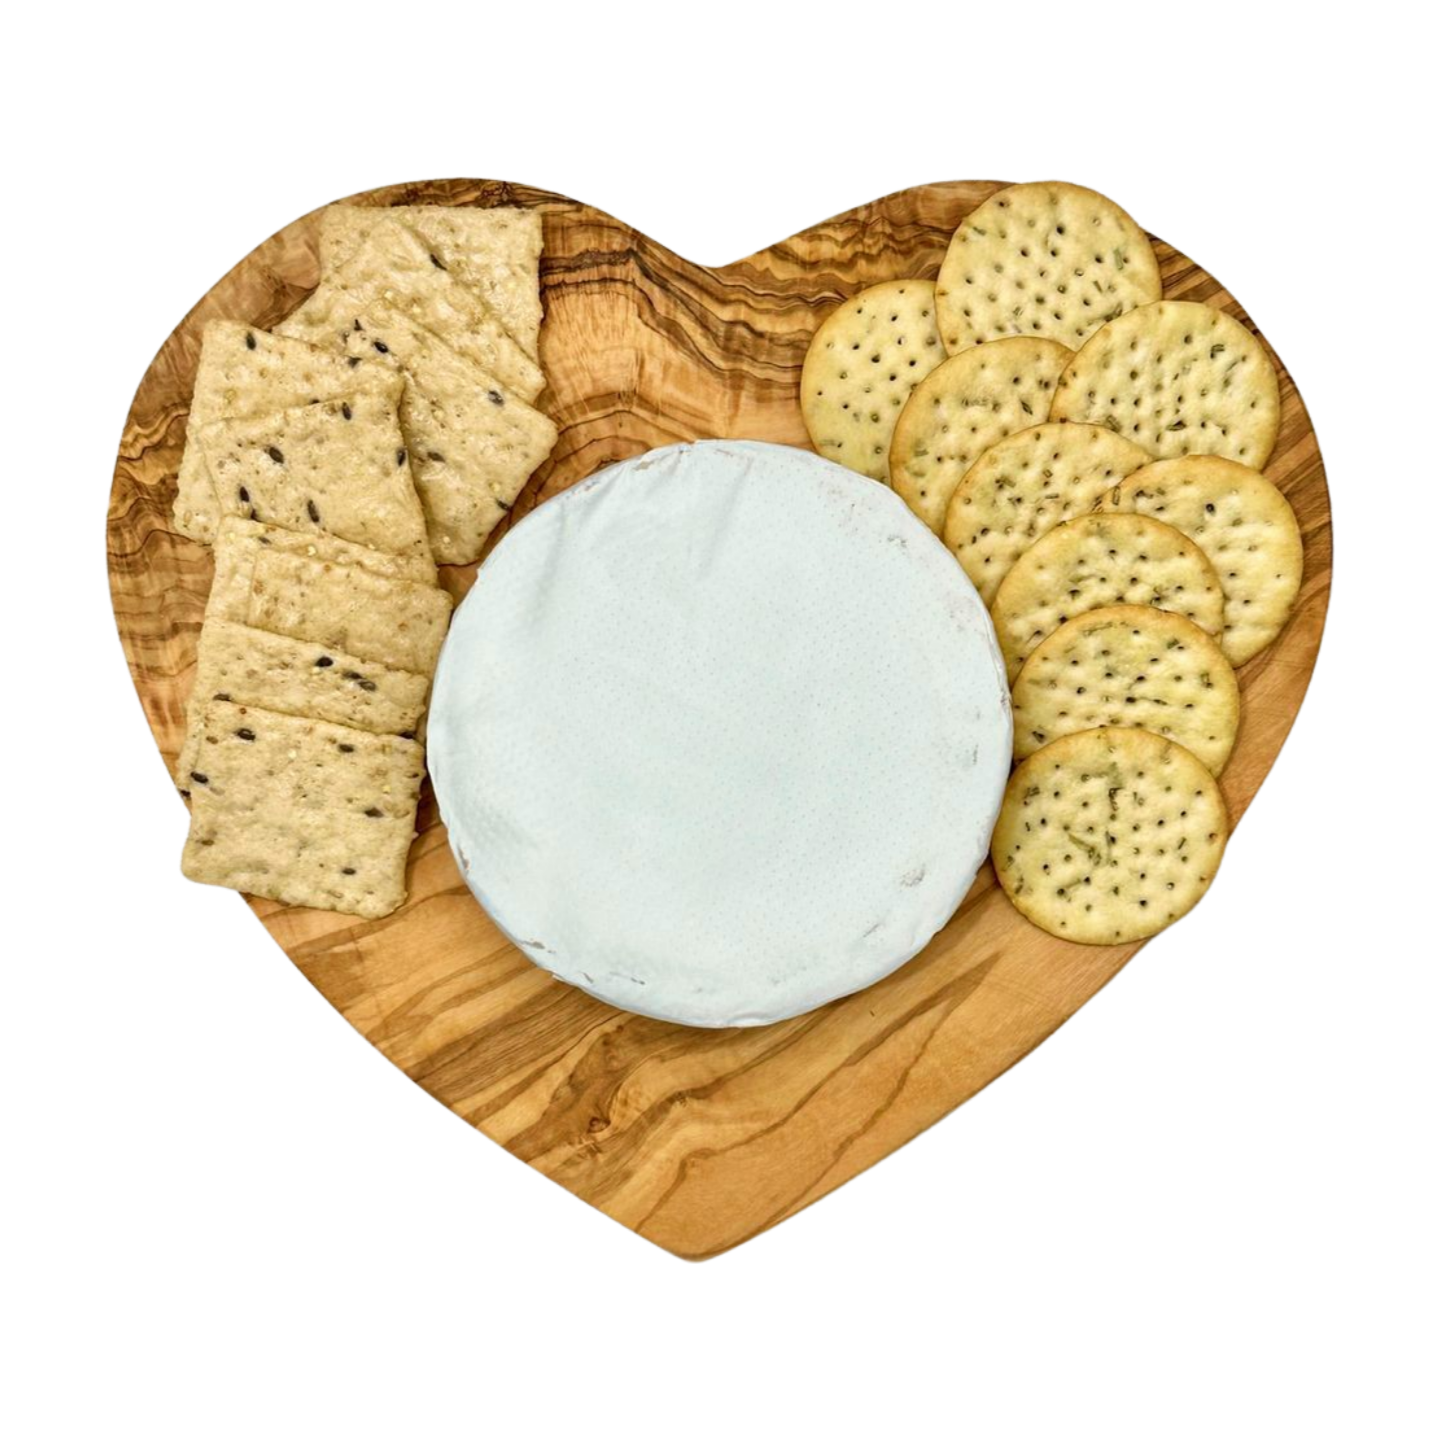 Heart-shaped olive wood charcuterie board pictured with cheese and crackers. Imported from Germany.